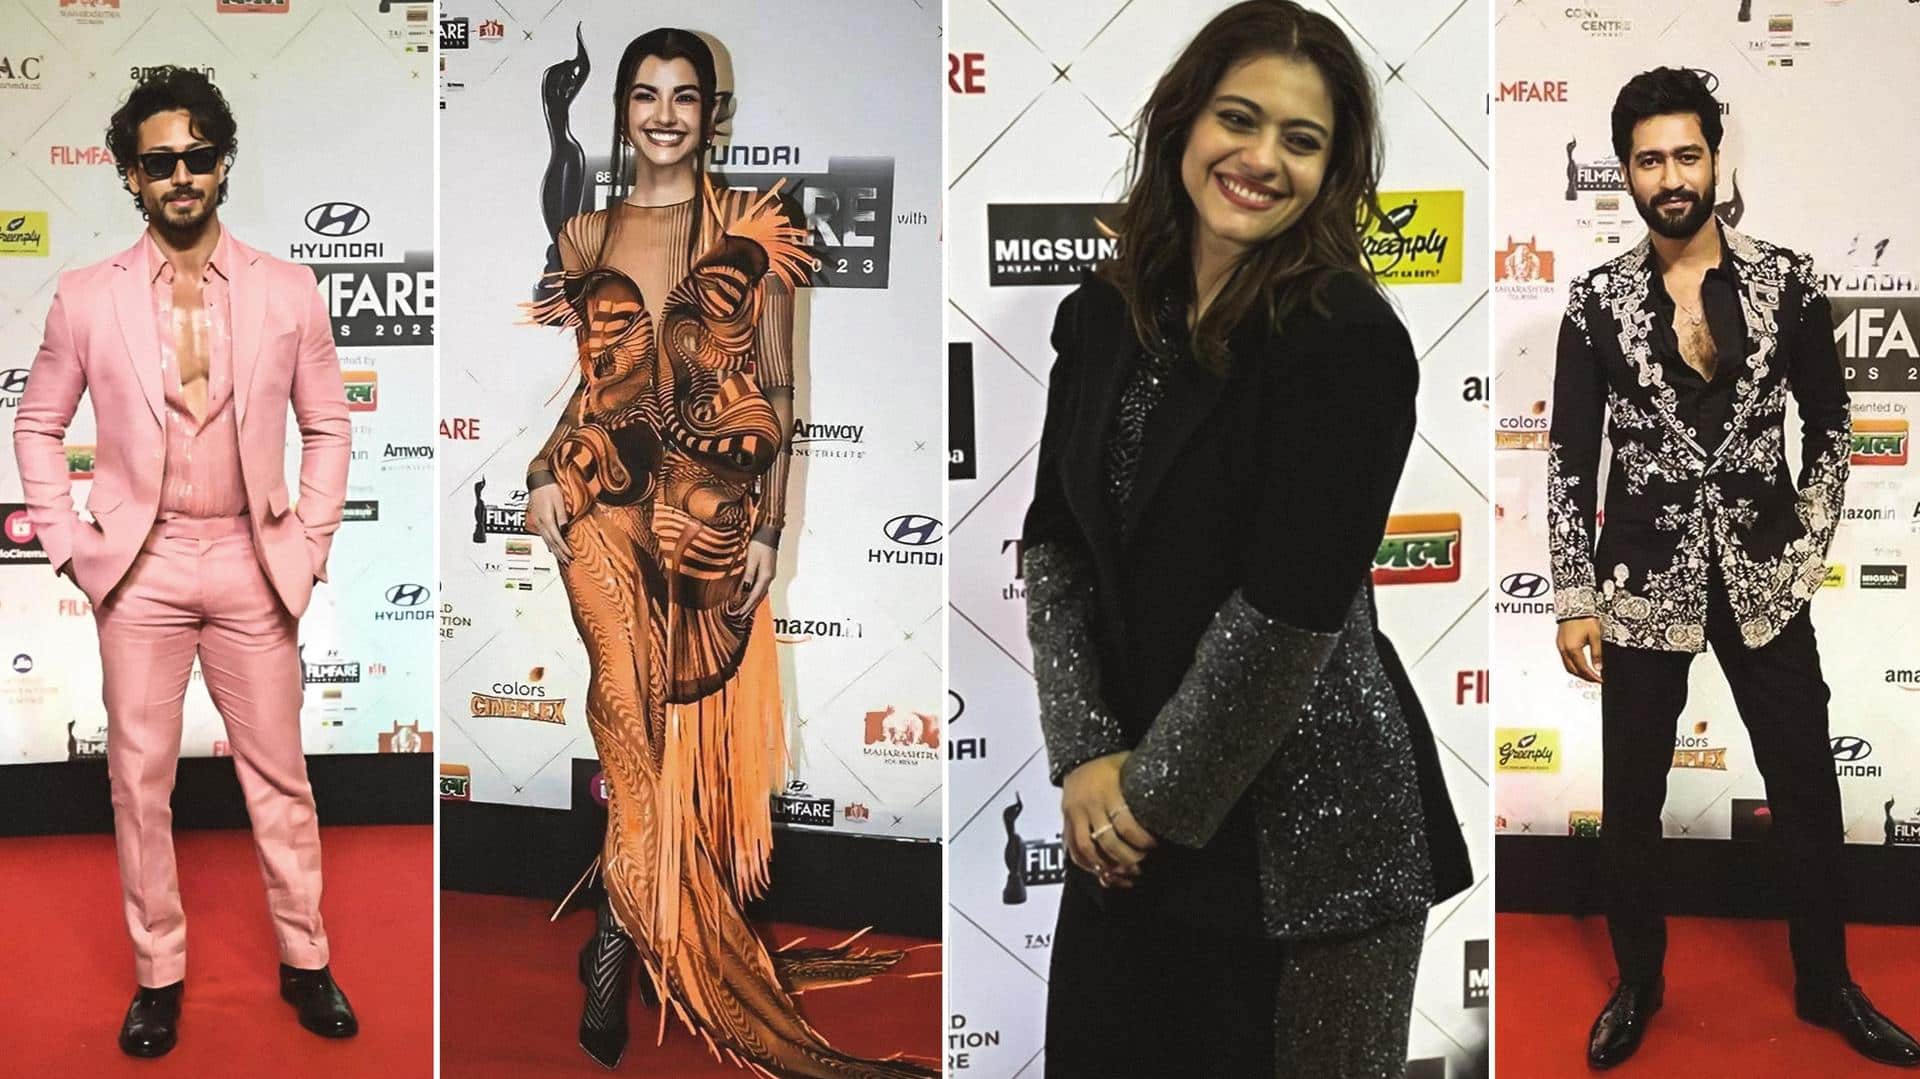 Filmfare Awards 2023: Most notable red carpet looks